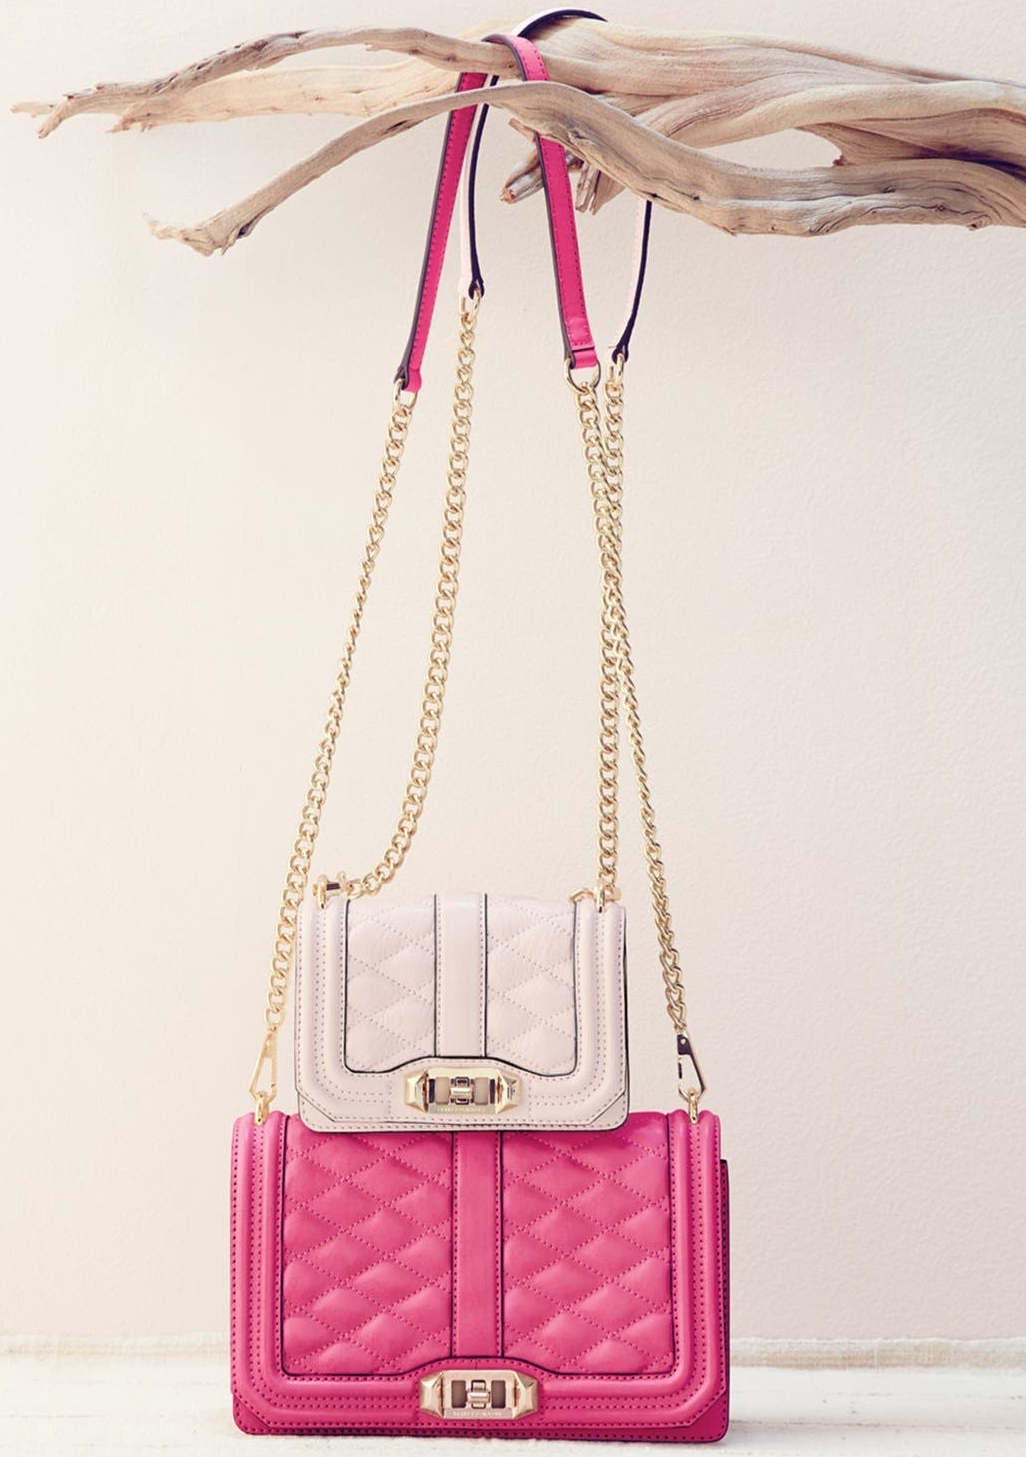 The petite version of the Love crossbody features turn-lock hardware and a chain strap